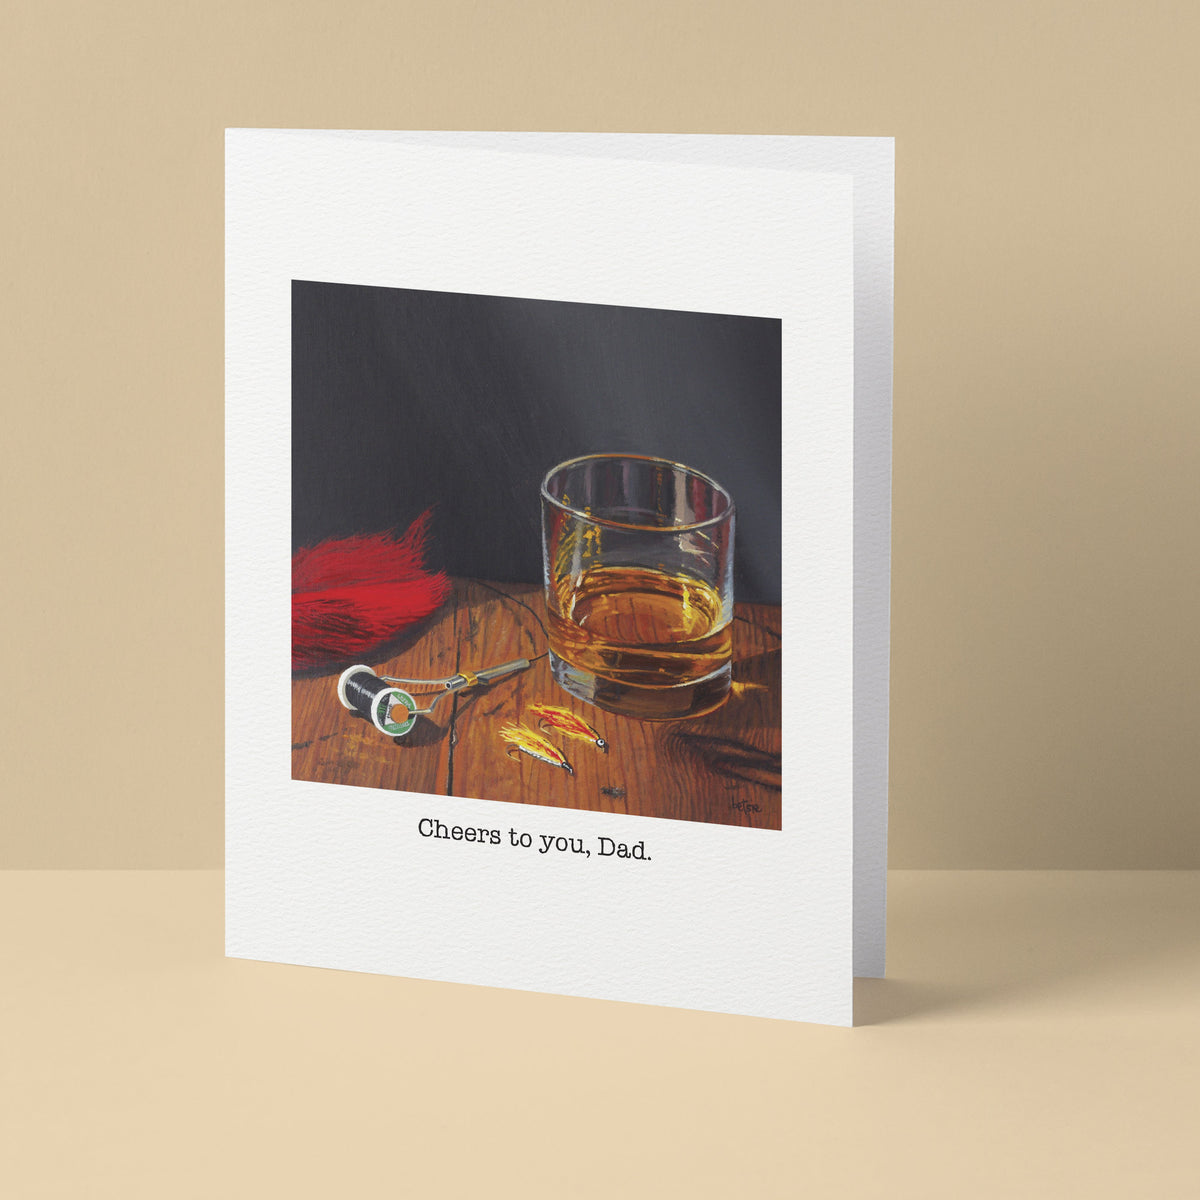 "Cheers to you, Dad" Greeting Card